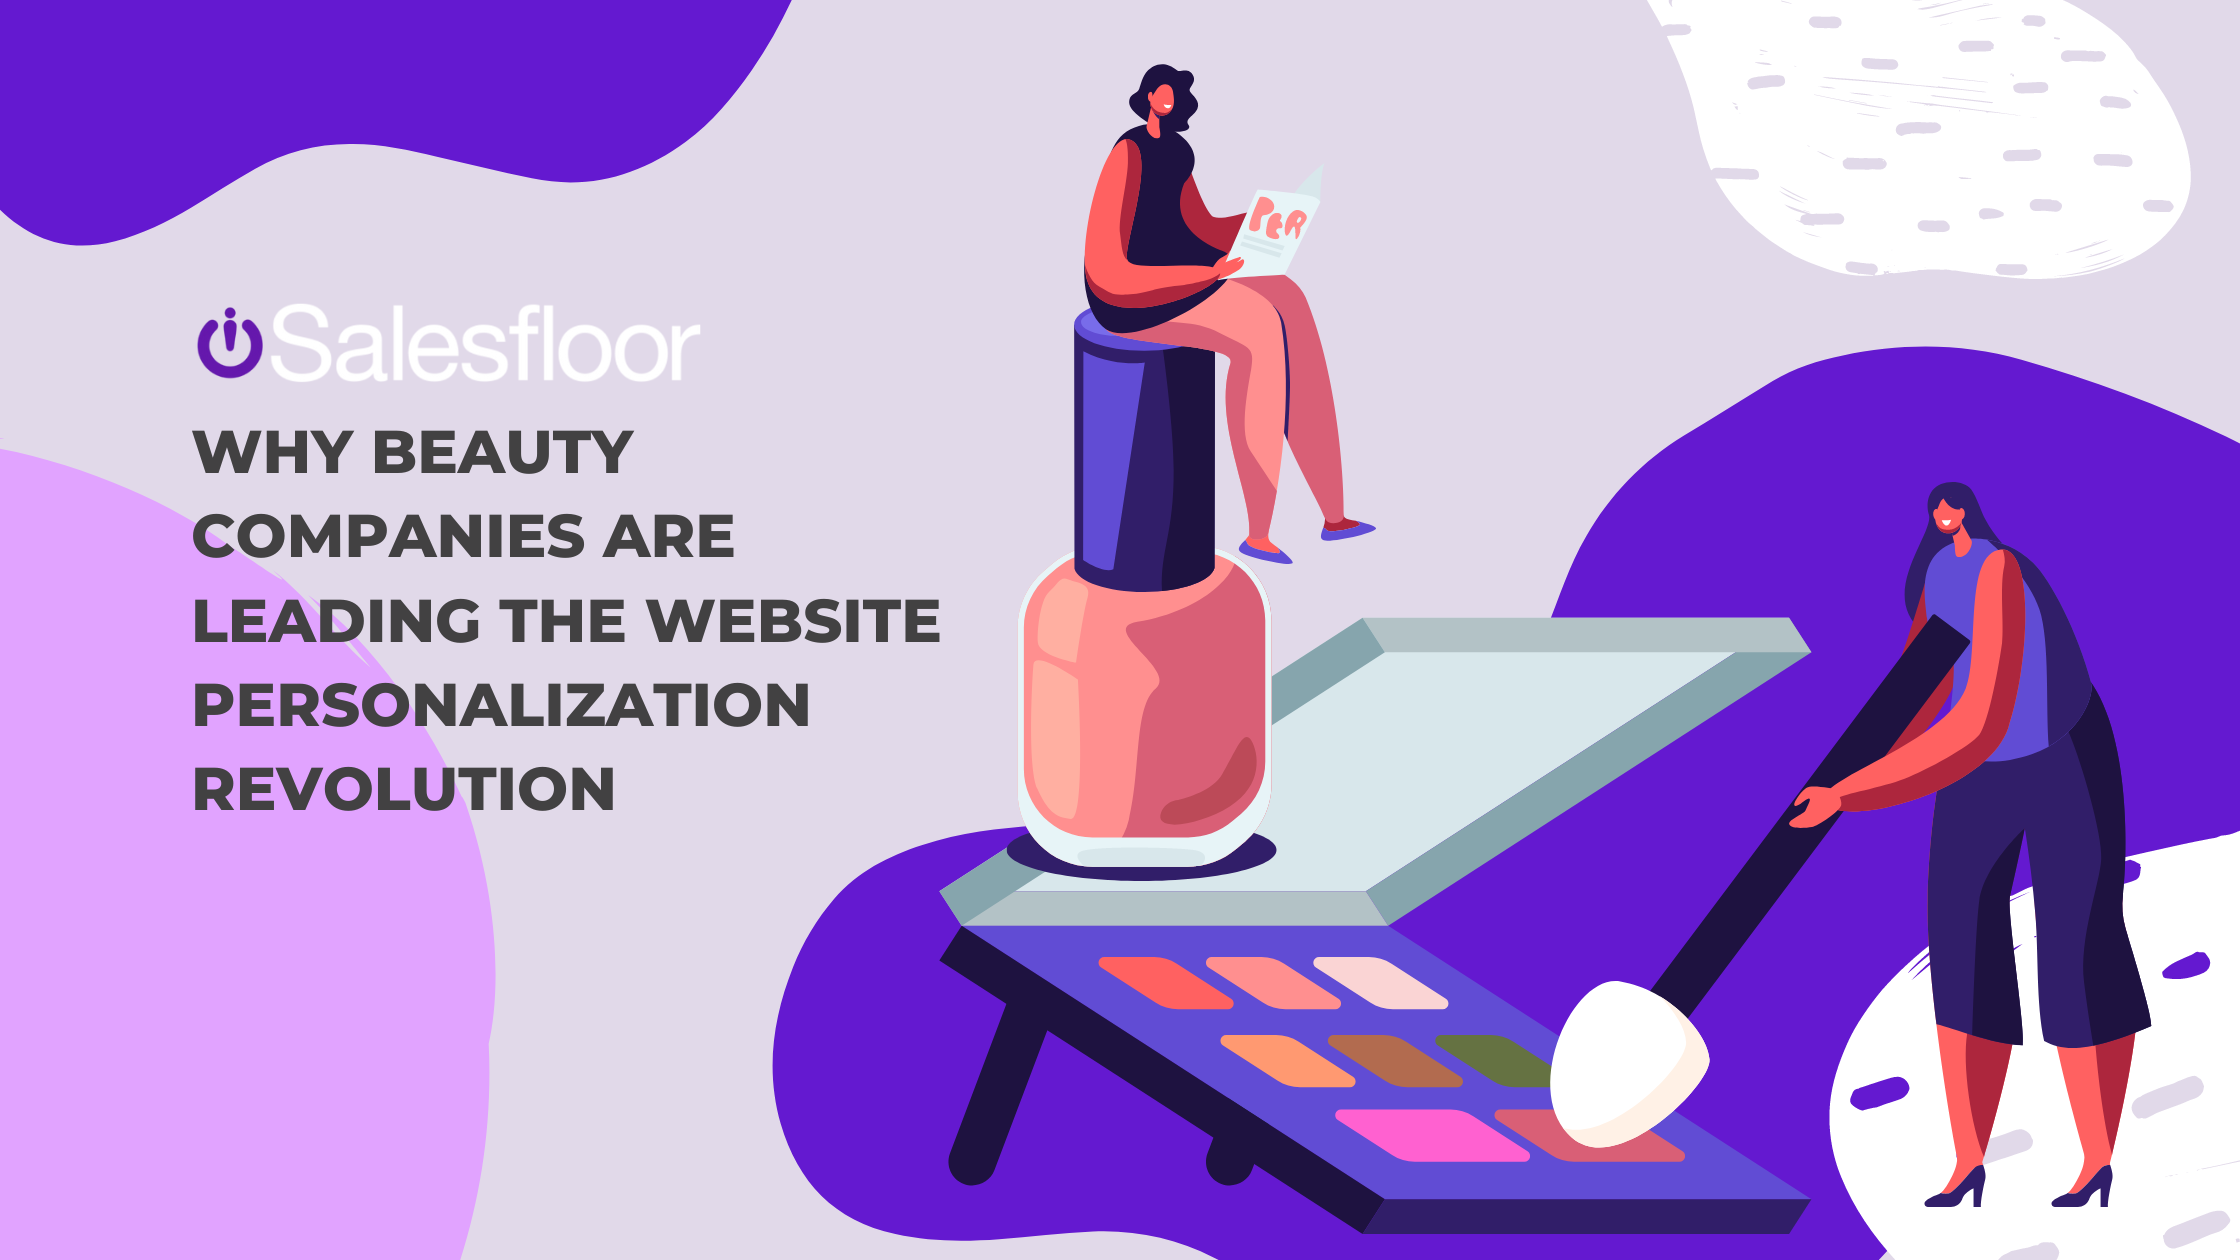 Why Beauty Companies Are Leading the Website Personalization Revolution